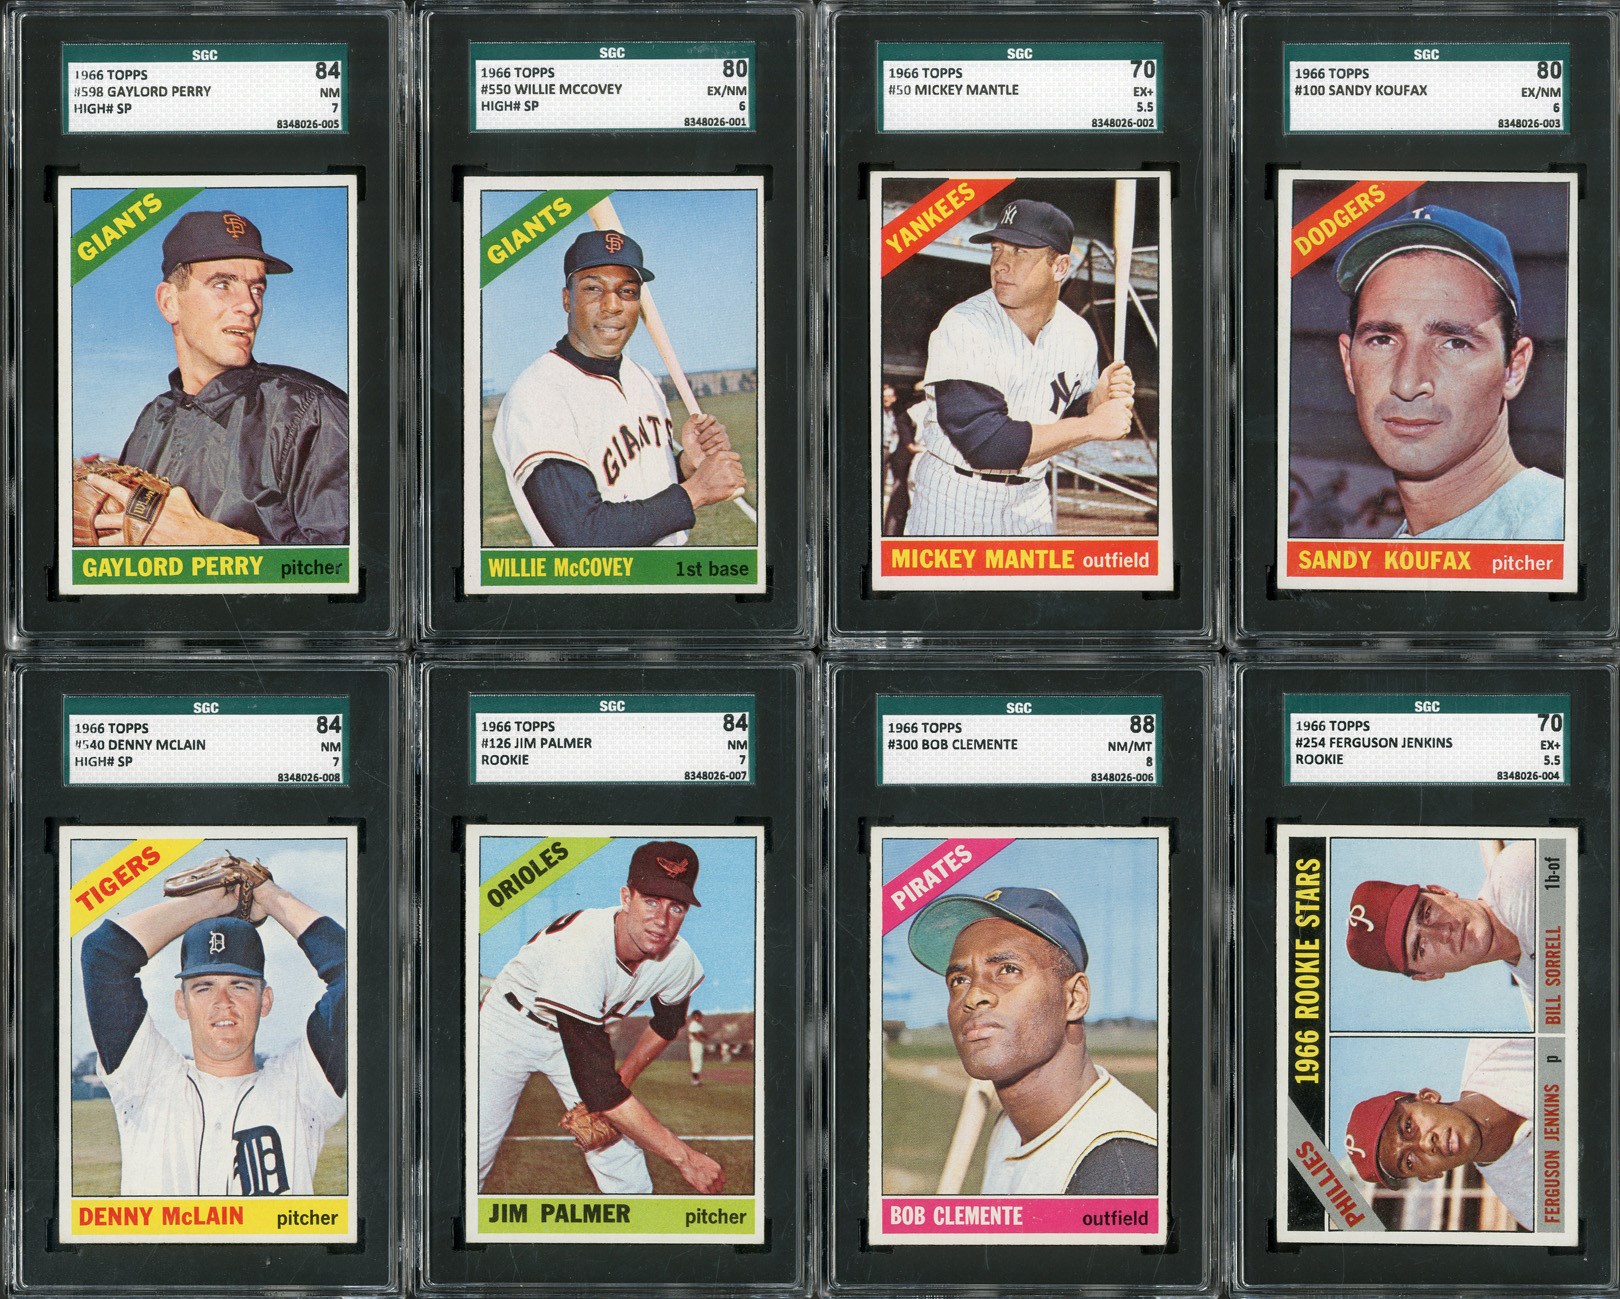 Baseball and Trading Cards - 1966 Topps Complete Set (598 Cards - 8 SGC Graded)